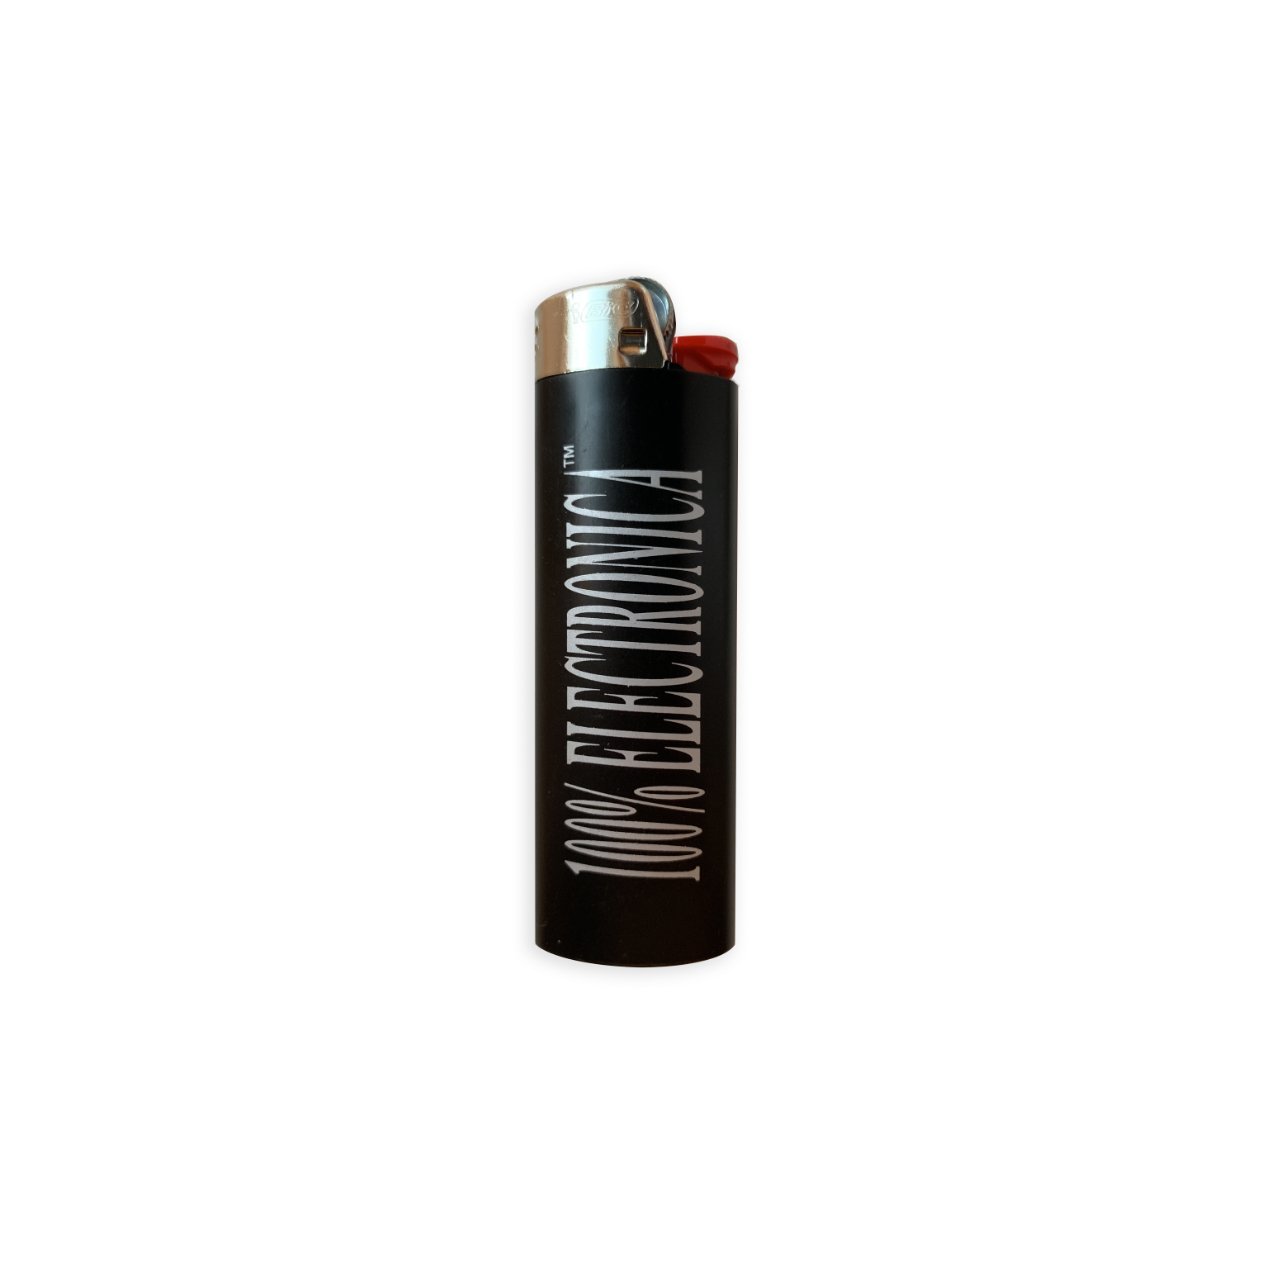 100% Electronica - 100% Electronica Logo Bic™ Lighter - 100% Electronica Official Store (Photo 1)